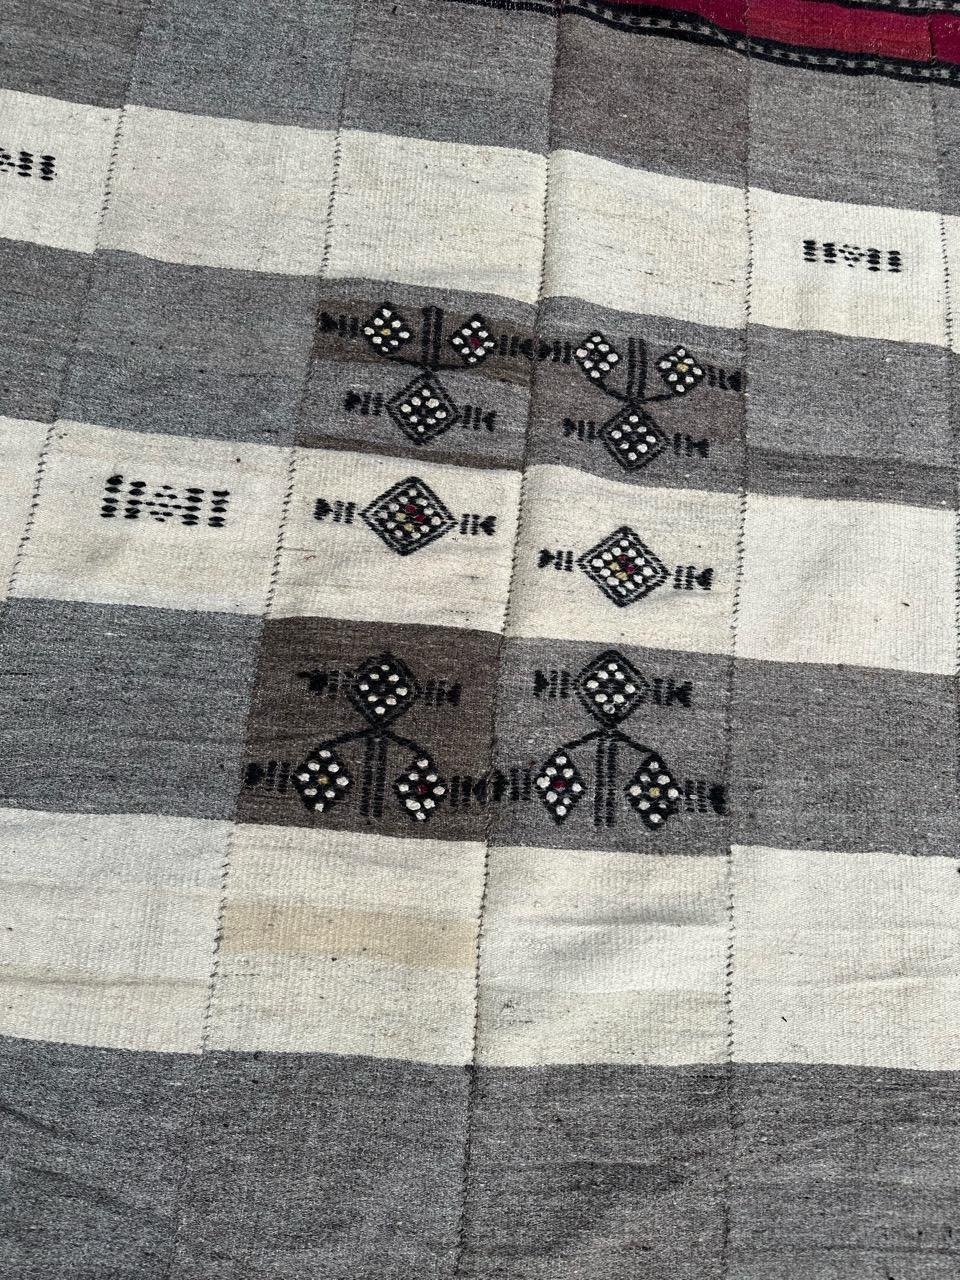 Nice antique woven rug, cover, with beautiful simple geometrical design and light colours, entirely hand woven with wool on wool foundation.

✨✨✨
